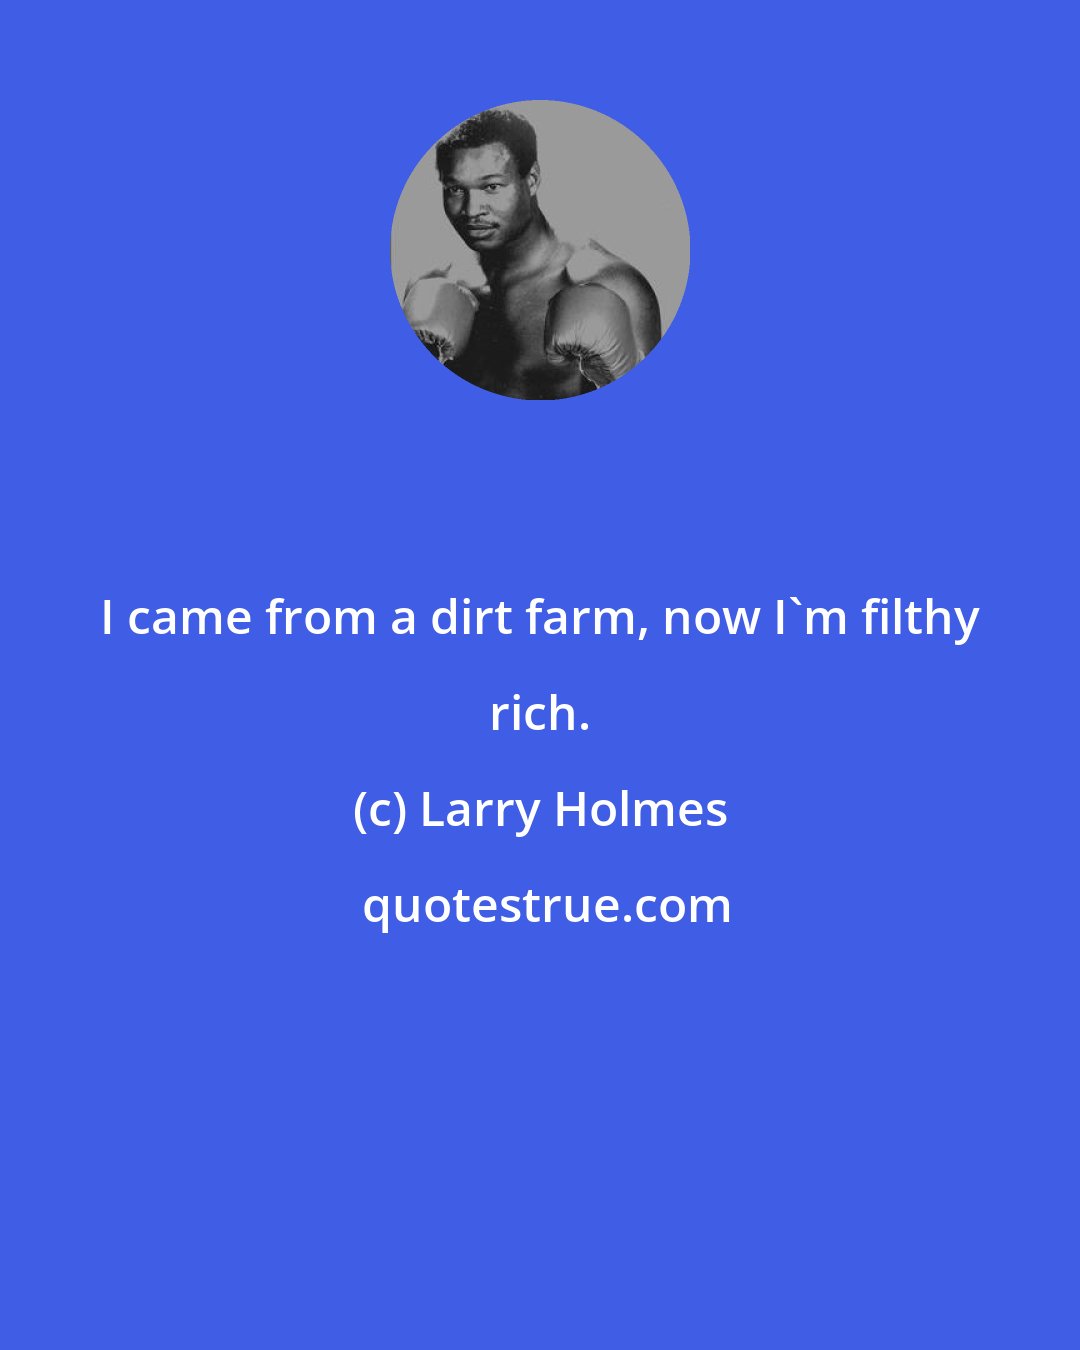 Larry Holmes: I came from a dirt farm, now I'm filthy rich.